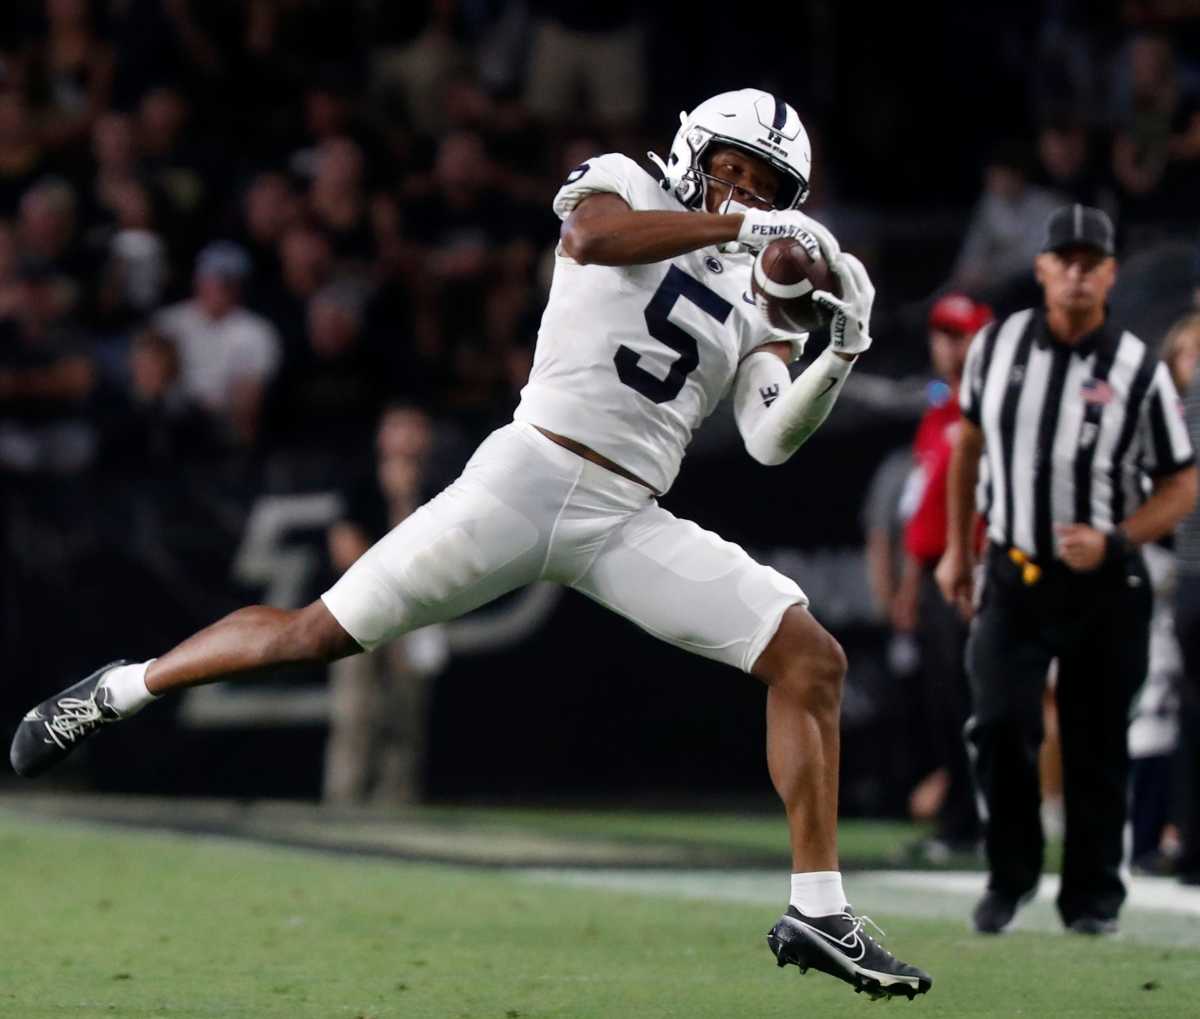 Penn State Nittany Lions wide receiver Mitchell Tinsley (5) catches a pass during the NCAA football game against the Purdue Boilermakers, Thursday, Sept. 1, 2022, at Ross-Ade Stadium in West Lafayette, Ind. Penn State won 35-31. Purduepennstatefb090122 Am00871